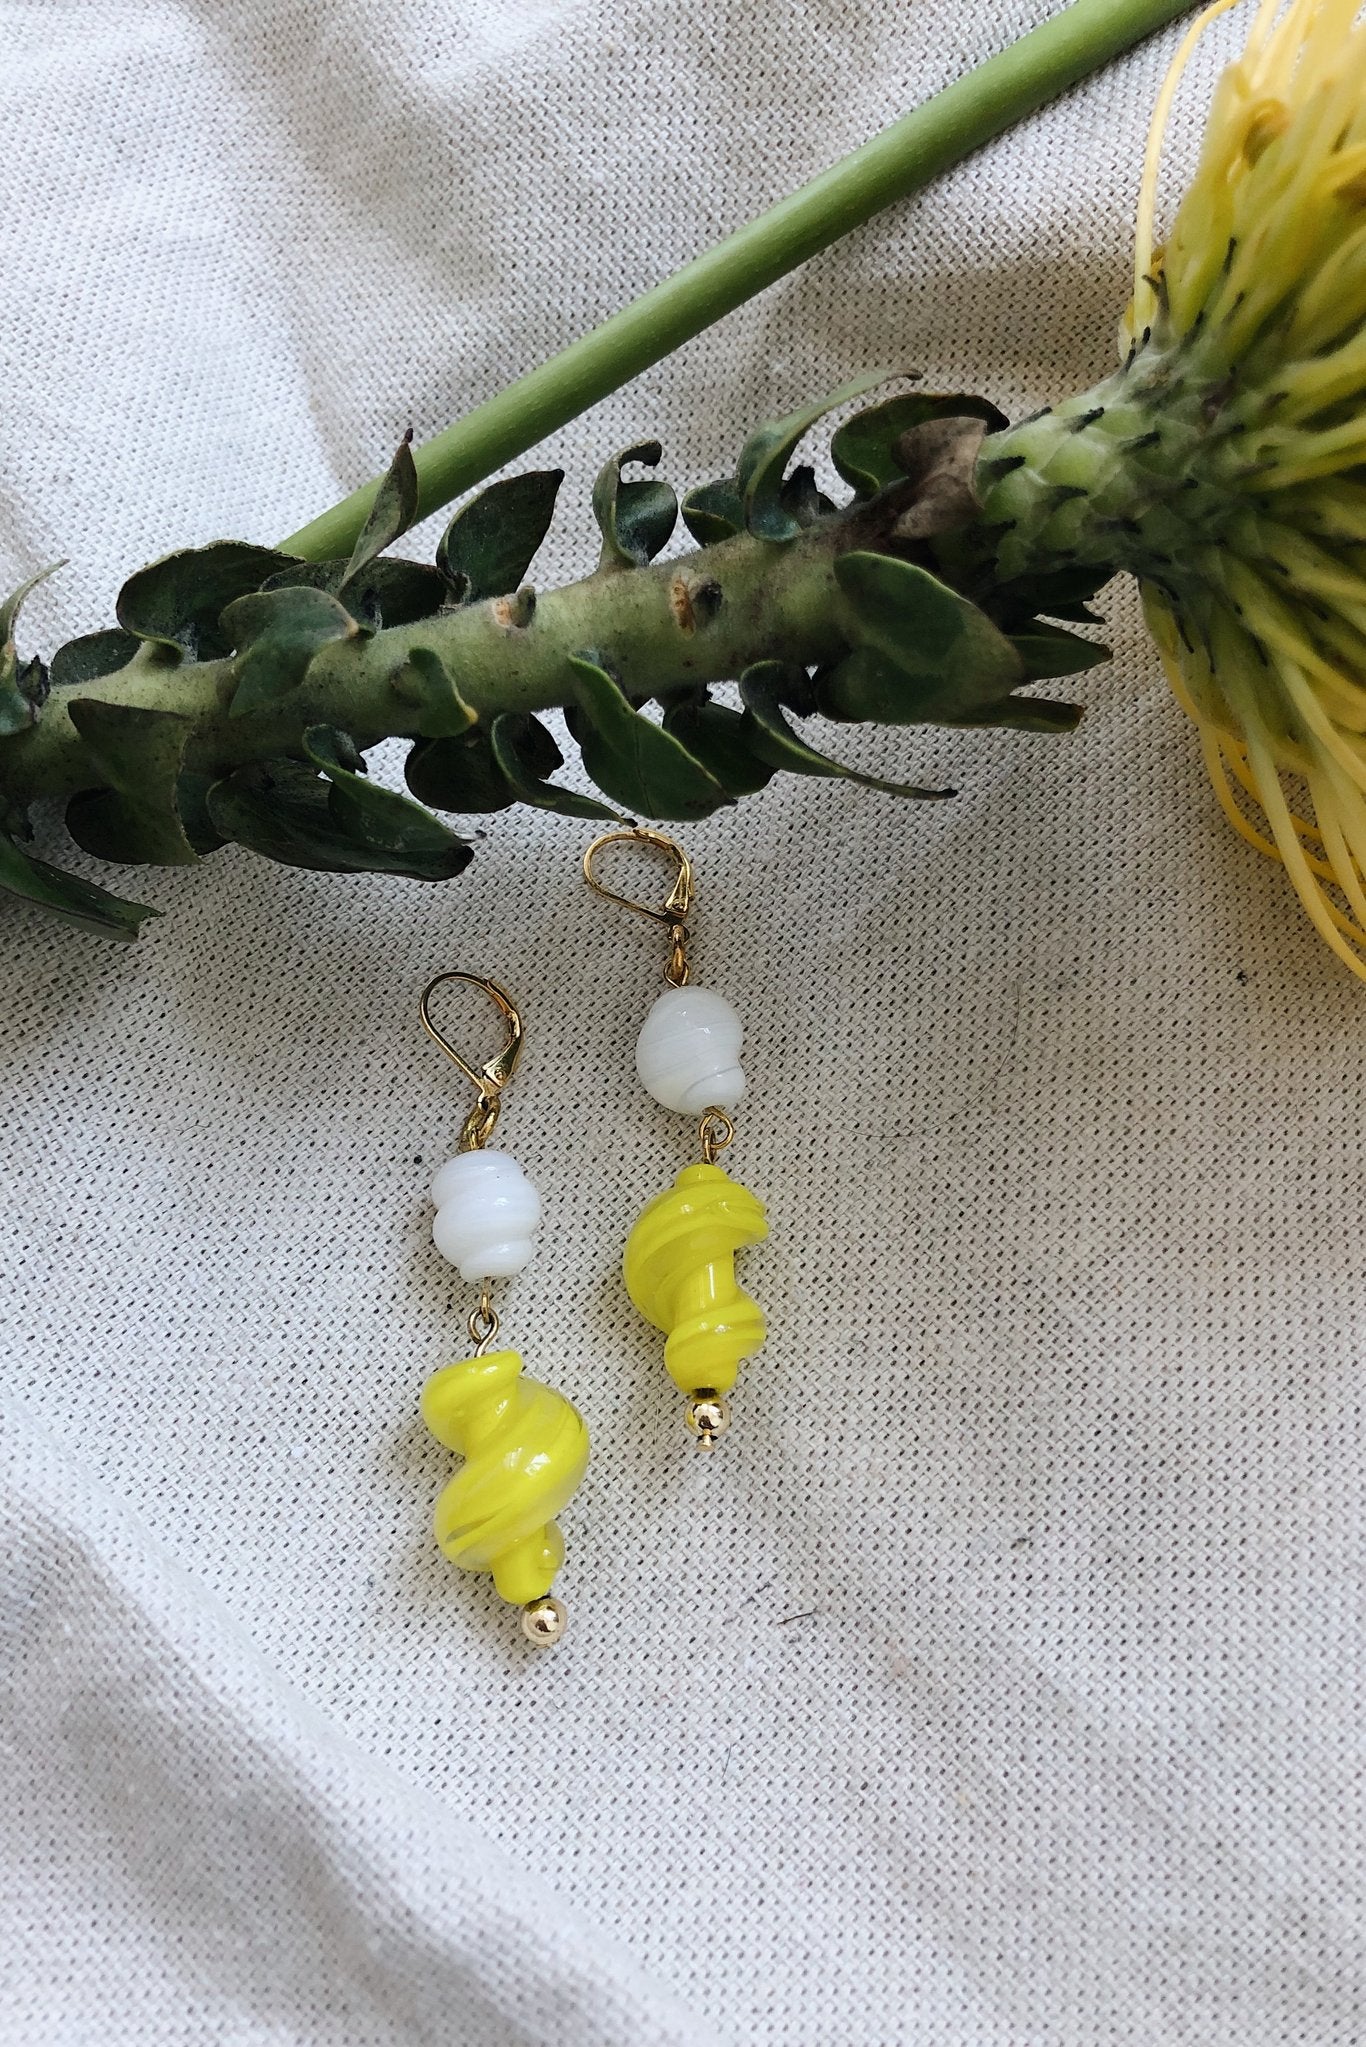 The Dewdrop Shop White and Yellow Antique Bead Earrings